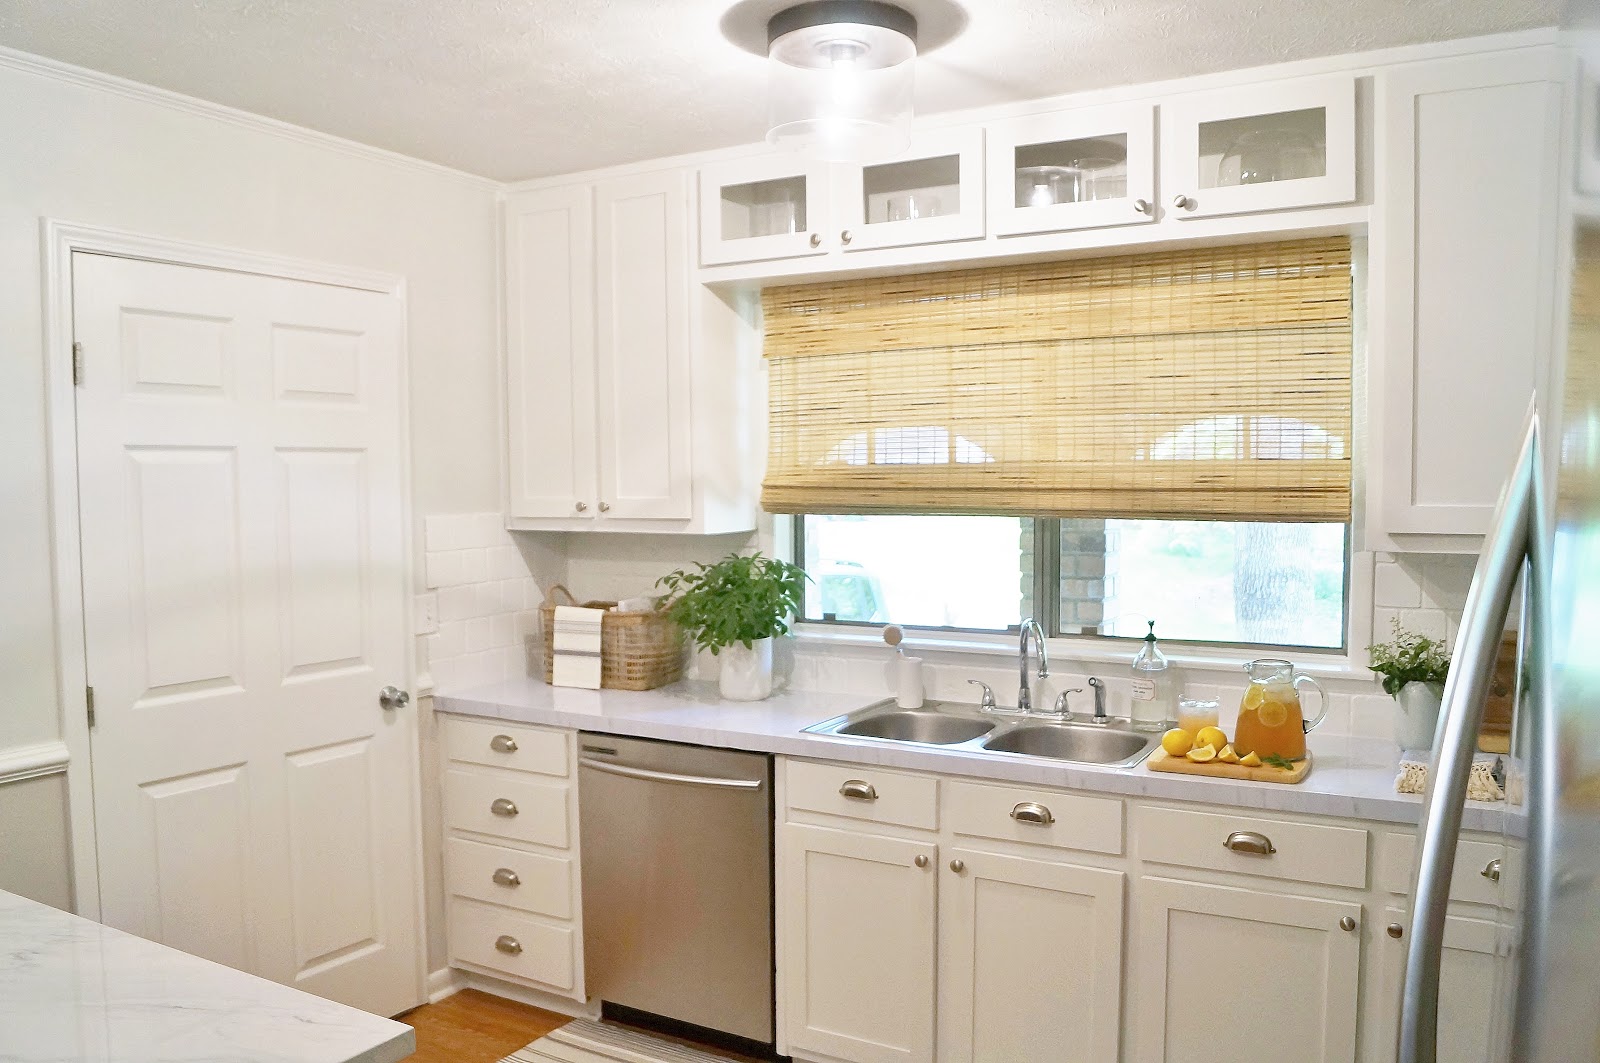 Don't Disturb This Groove: Refacing Kitchen Cabinets with New Doors